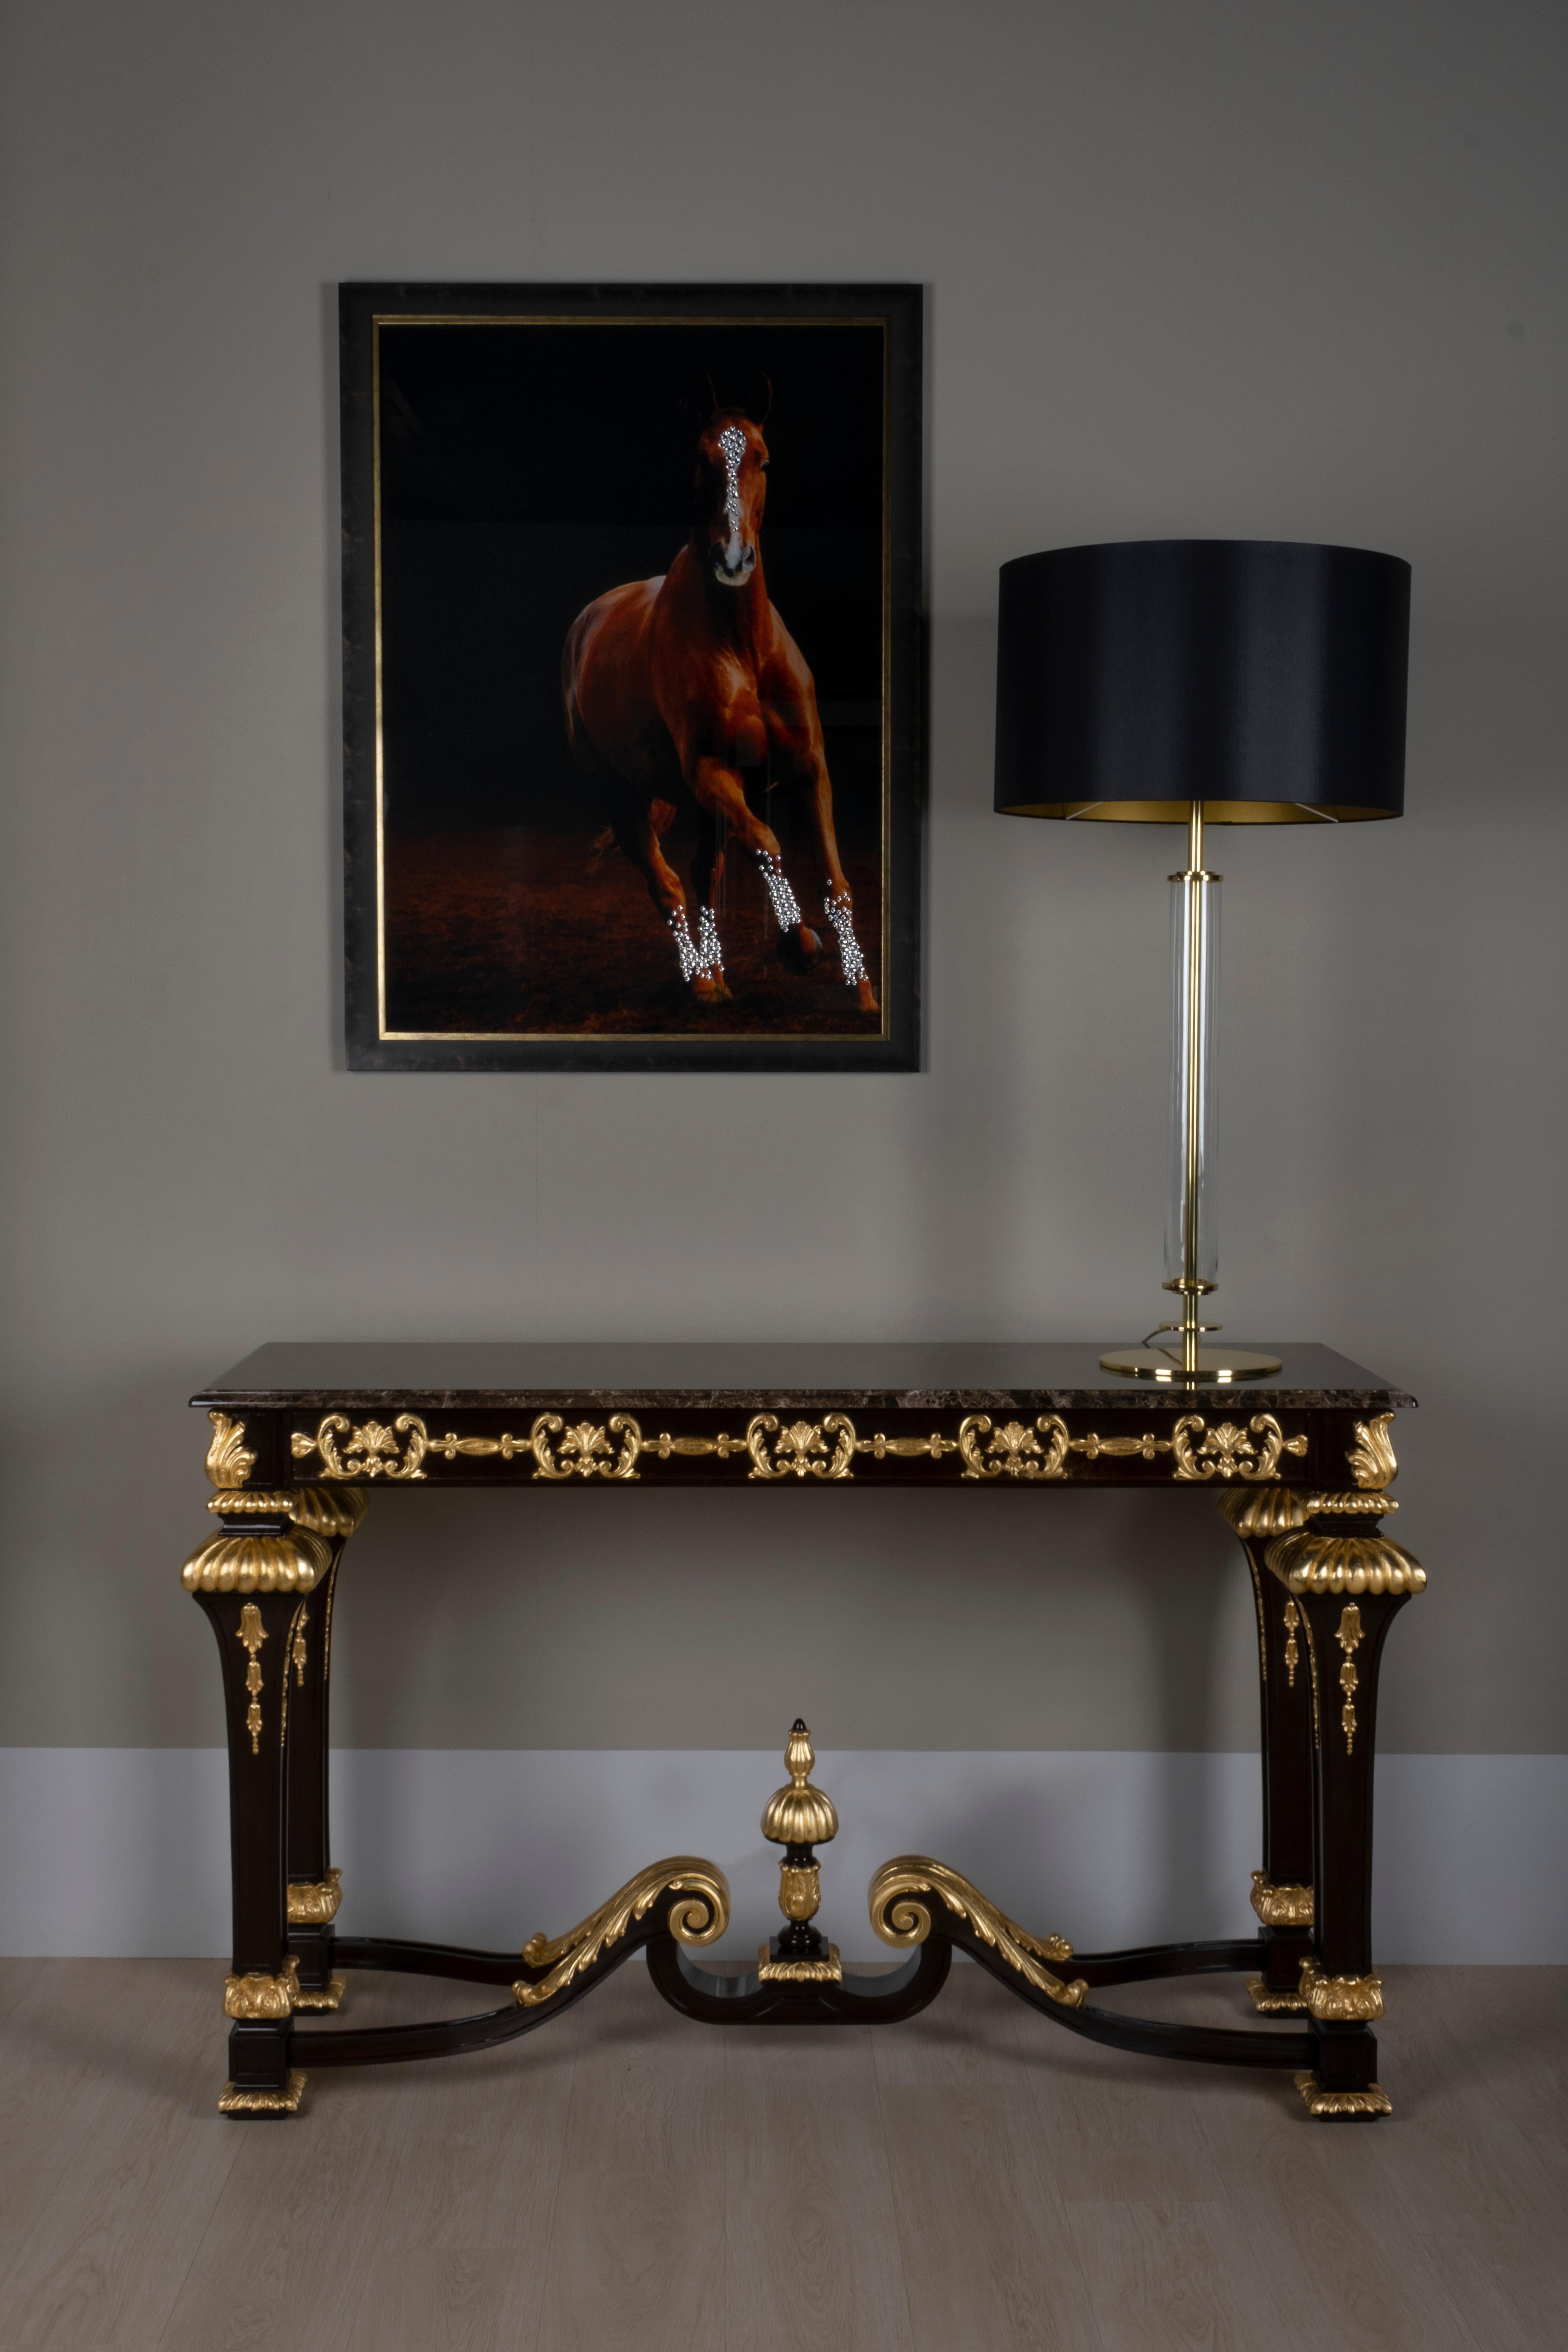 Console Exilis Neoclassical collection, handcrafted in Portugal - Europe by GF Modern.

A French Neoclassical Style console table, Hand Carved in Linden Wood.

An exclusive and sumptuous console table that catches the eye of anyone who enters the